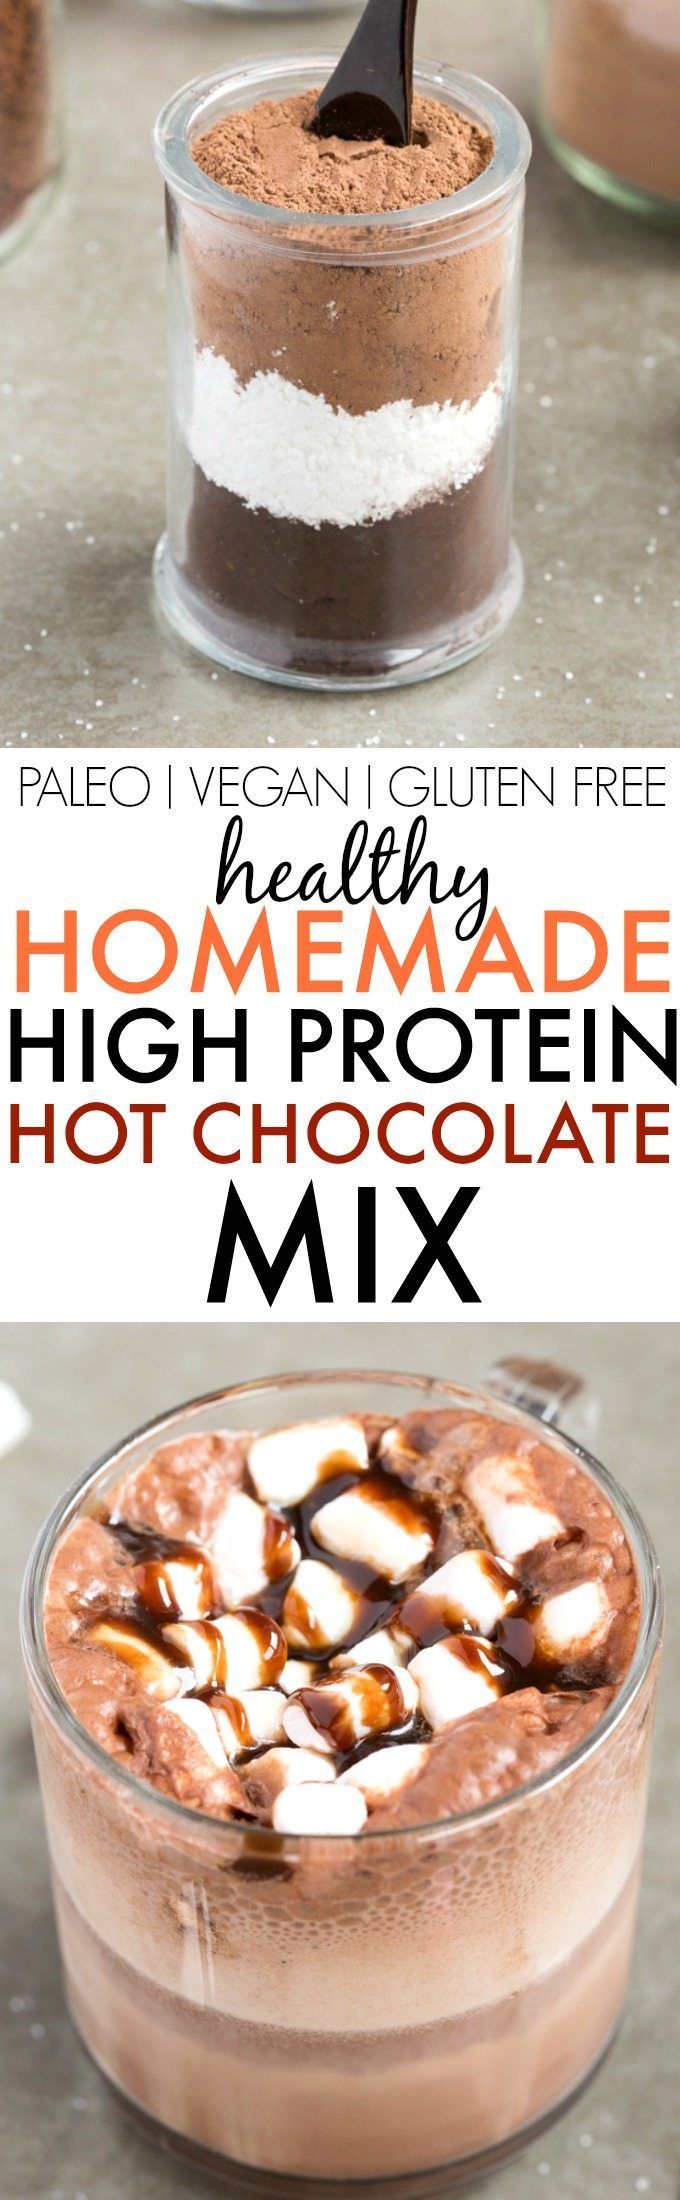 Healthy Homemade High Protein Hot Chocolate Mix (V, GF, Paleo)- An easy, 3 ingredient hot cocoa mix completely sugar free, low